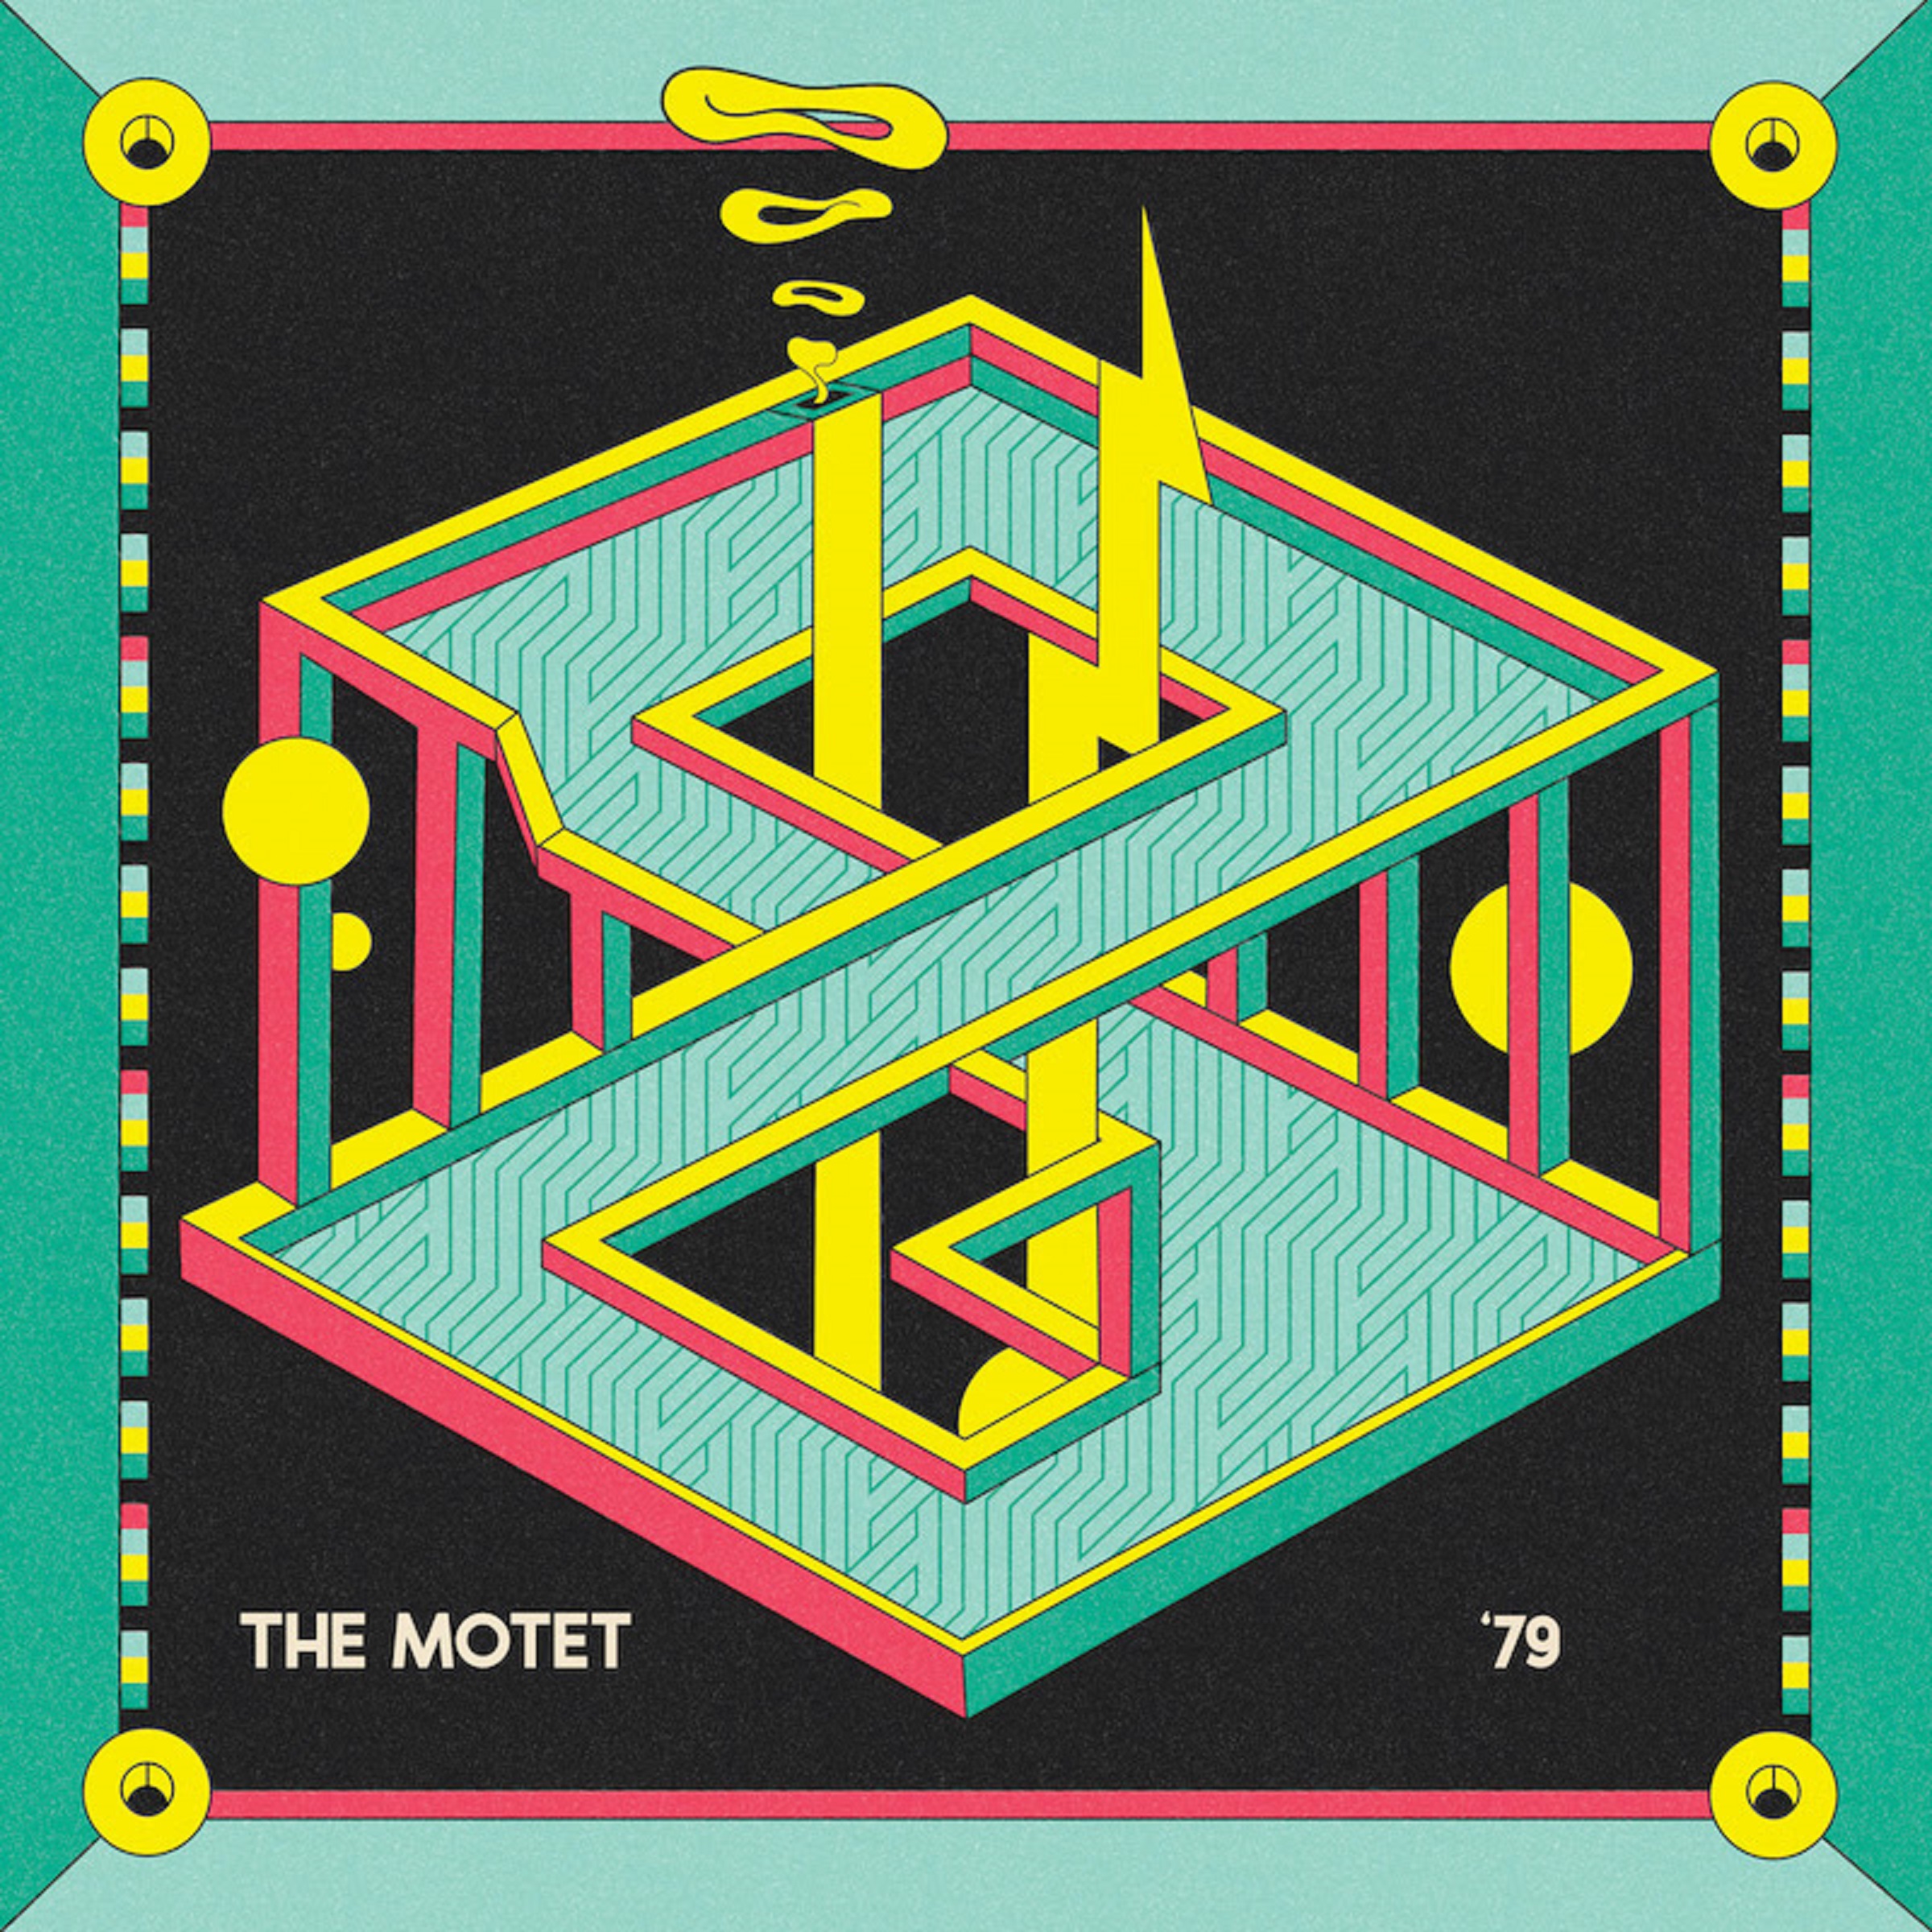 Funk, jazz & soul outfit The Motet announce instrumental LP All Day with lead single “‘79”